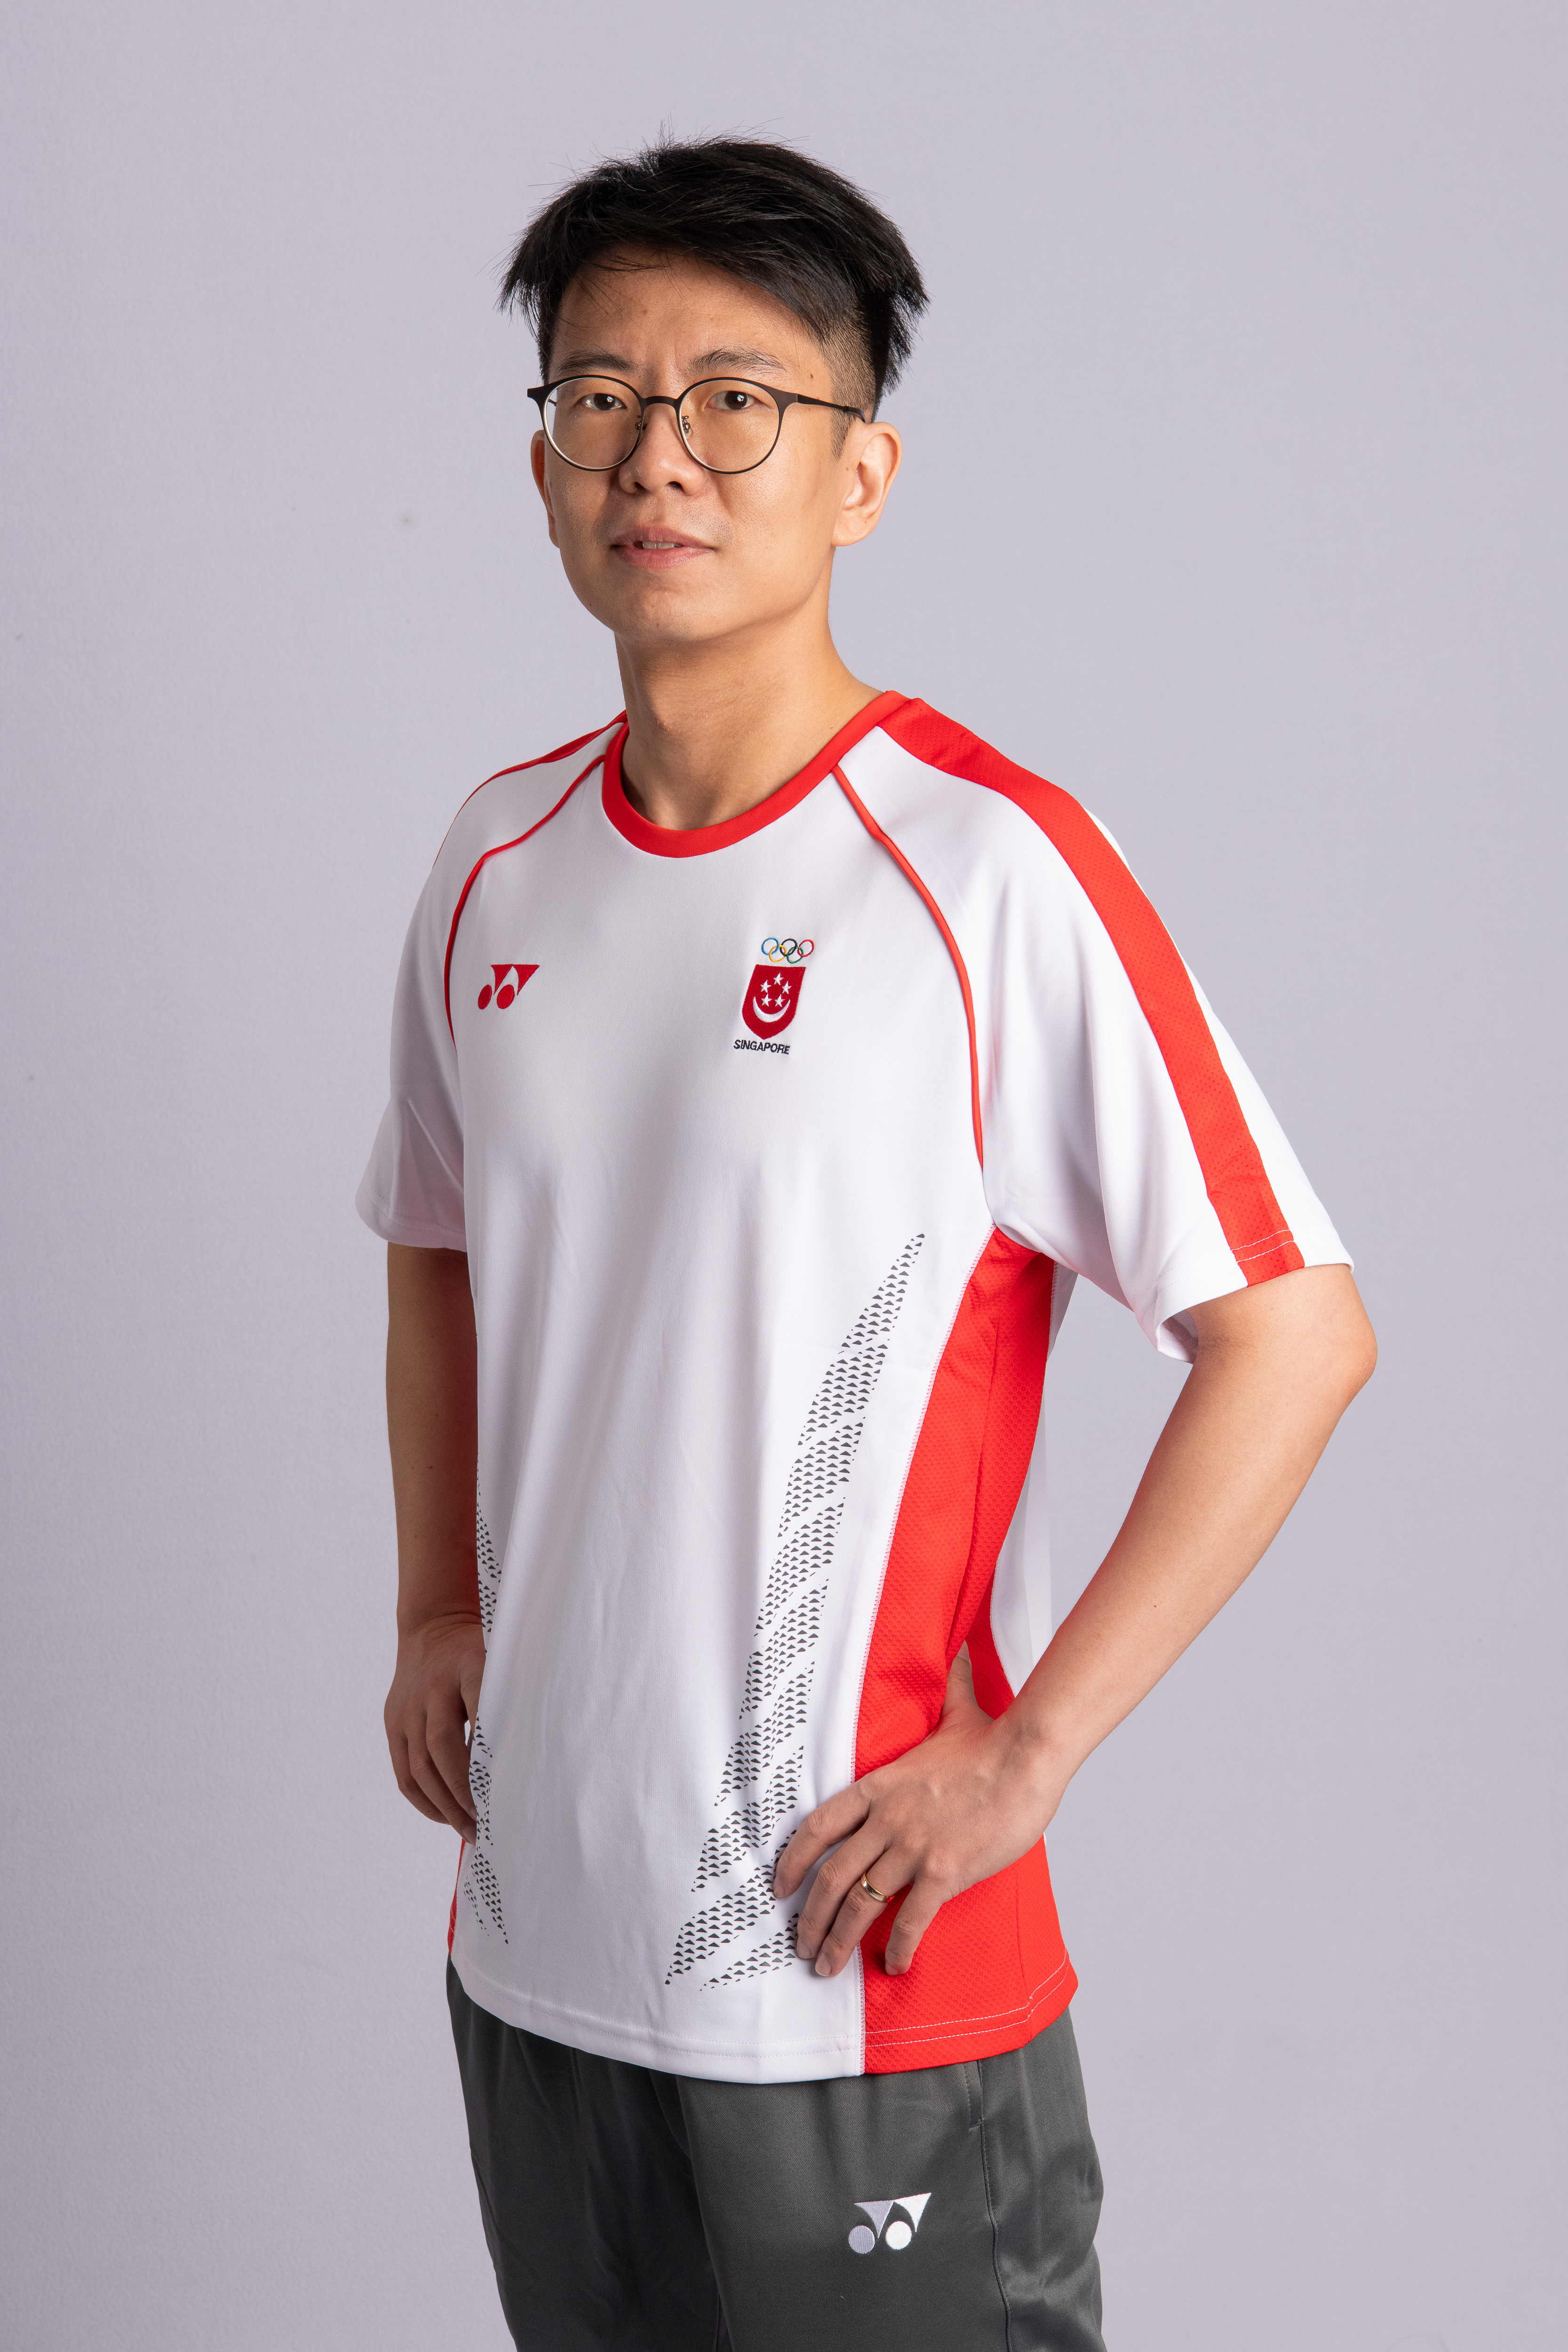 Luo Cheng